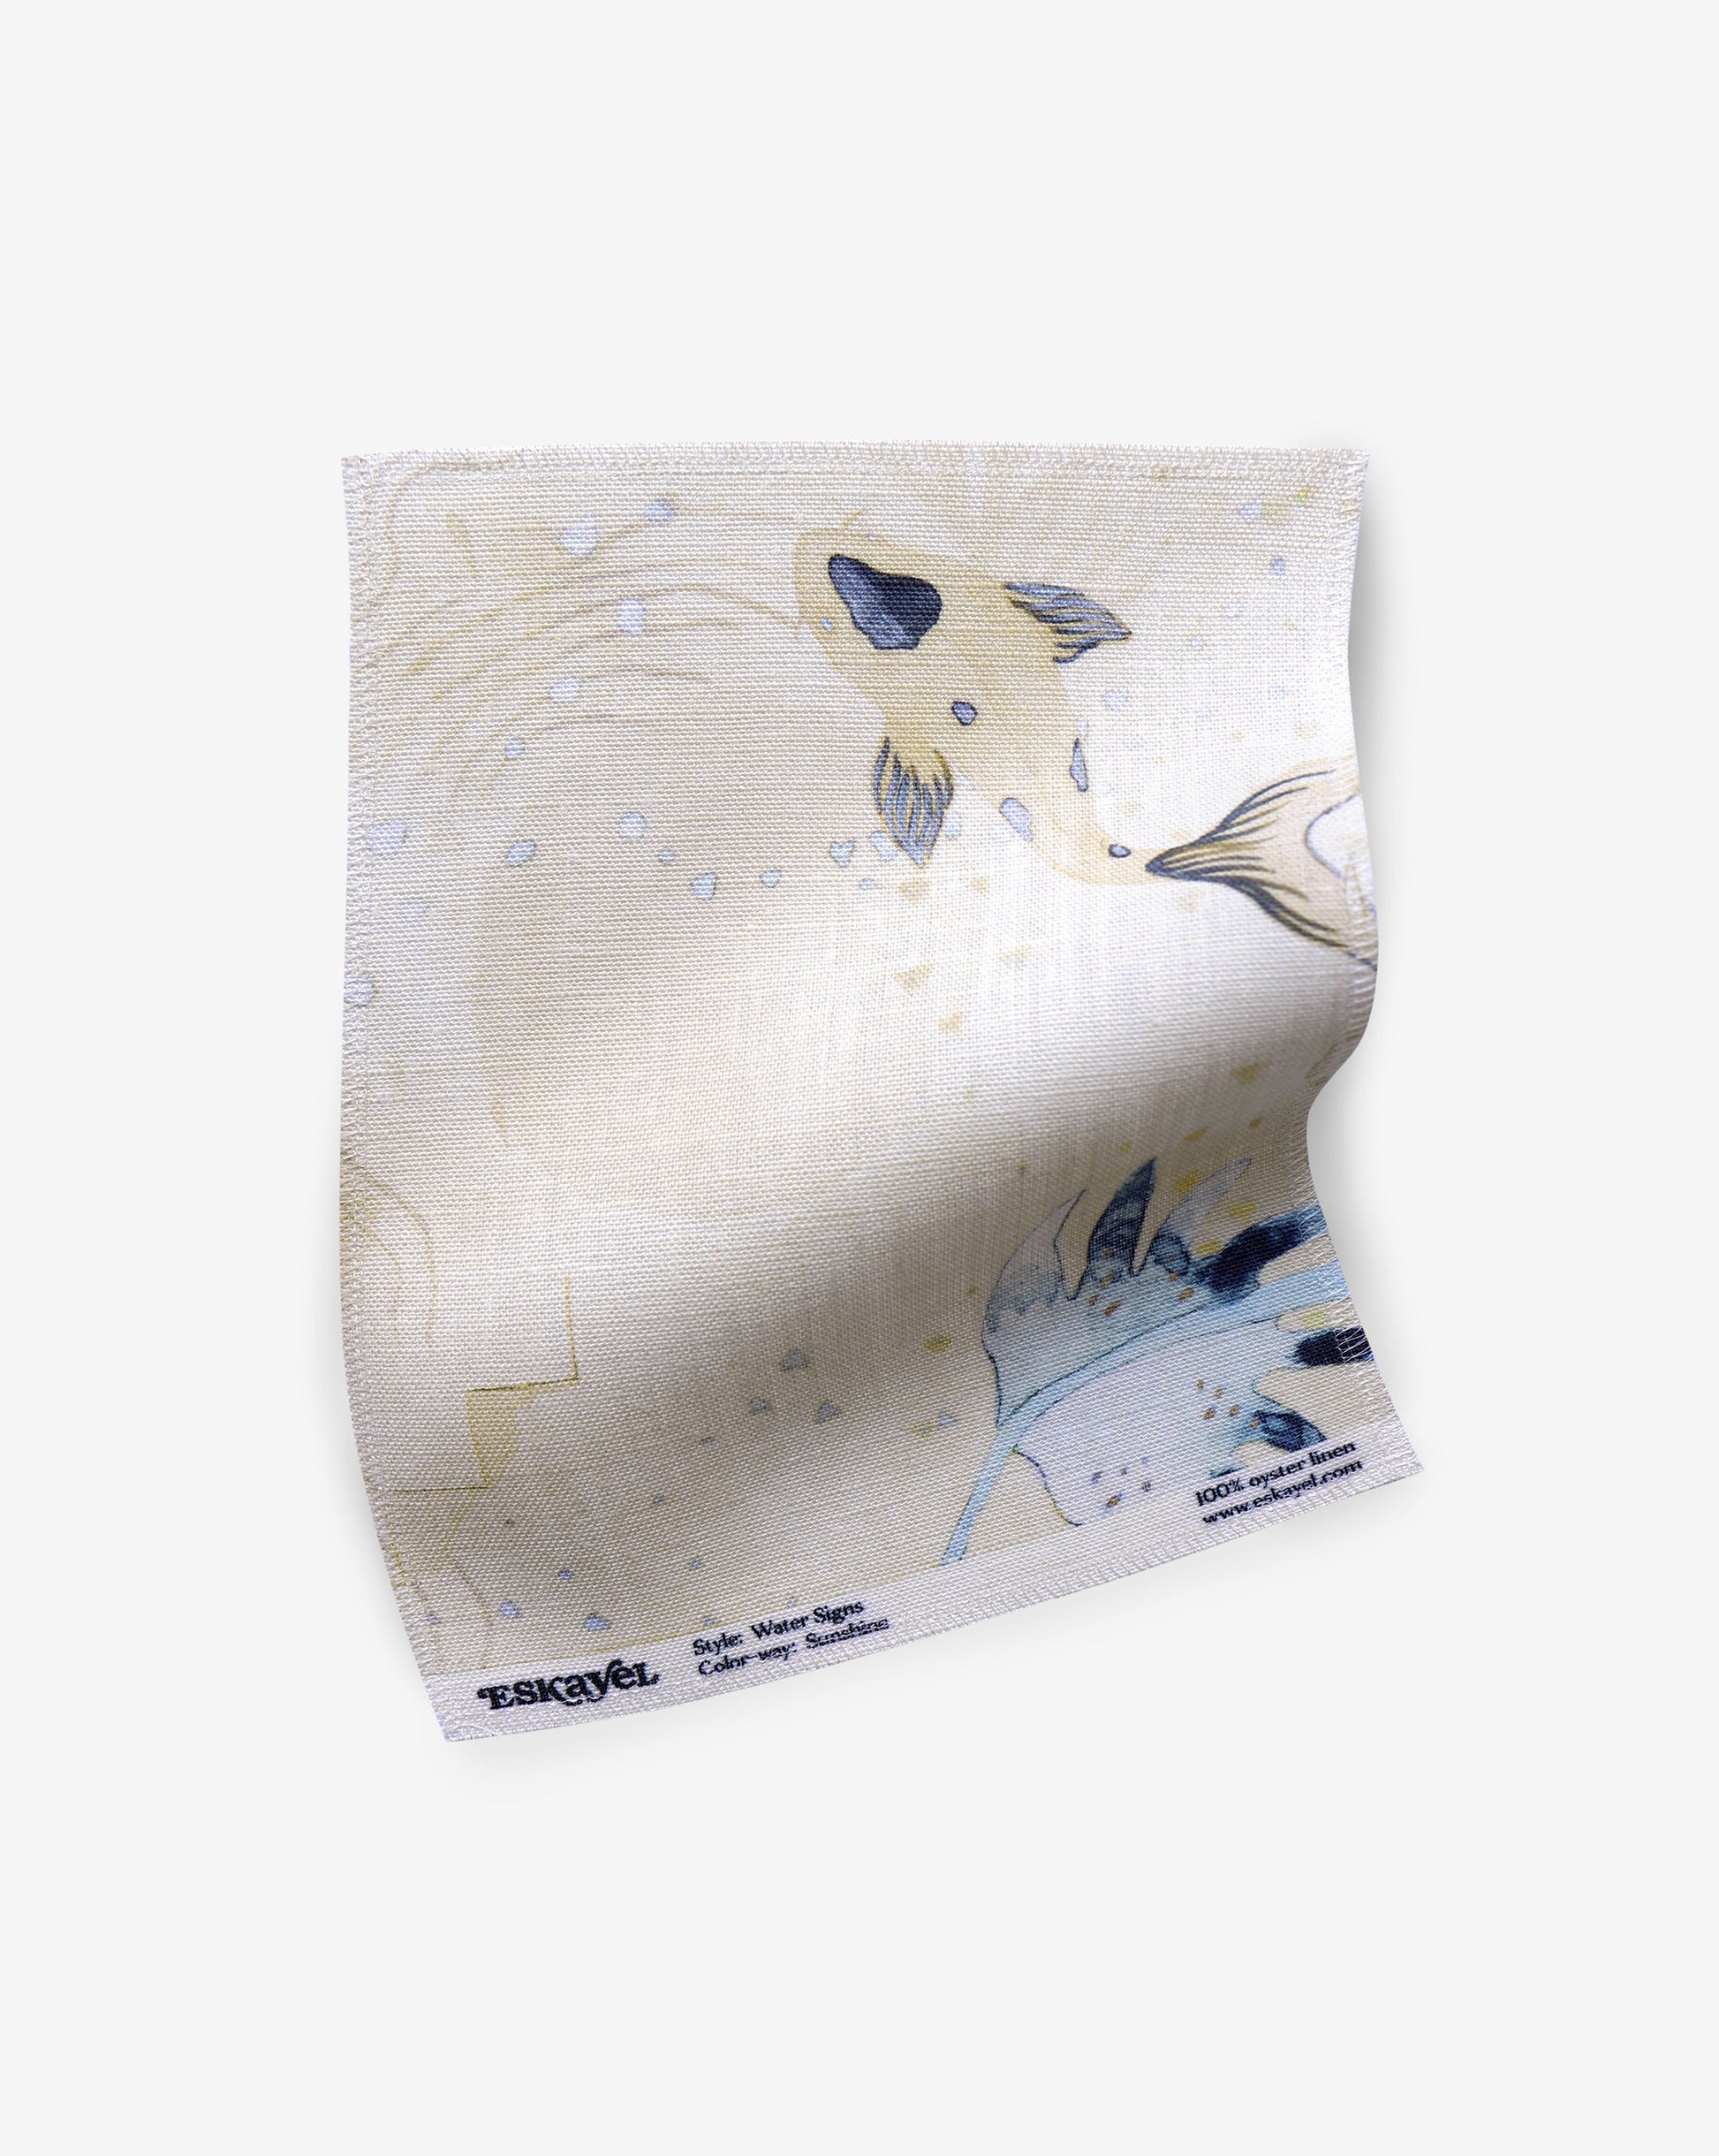 A high-end Water Signs Fabric Sunshine with an image of a fish on it